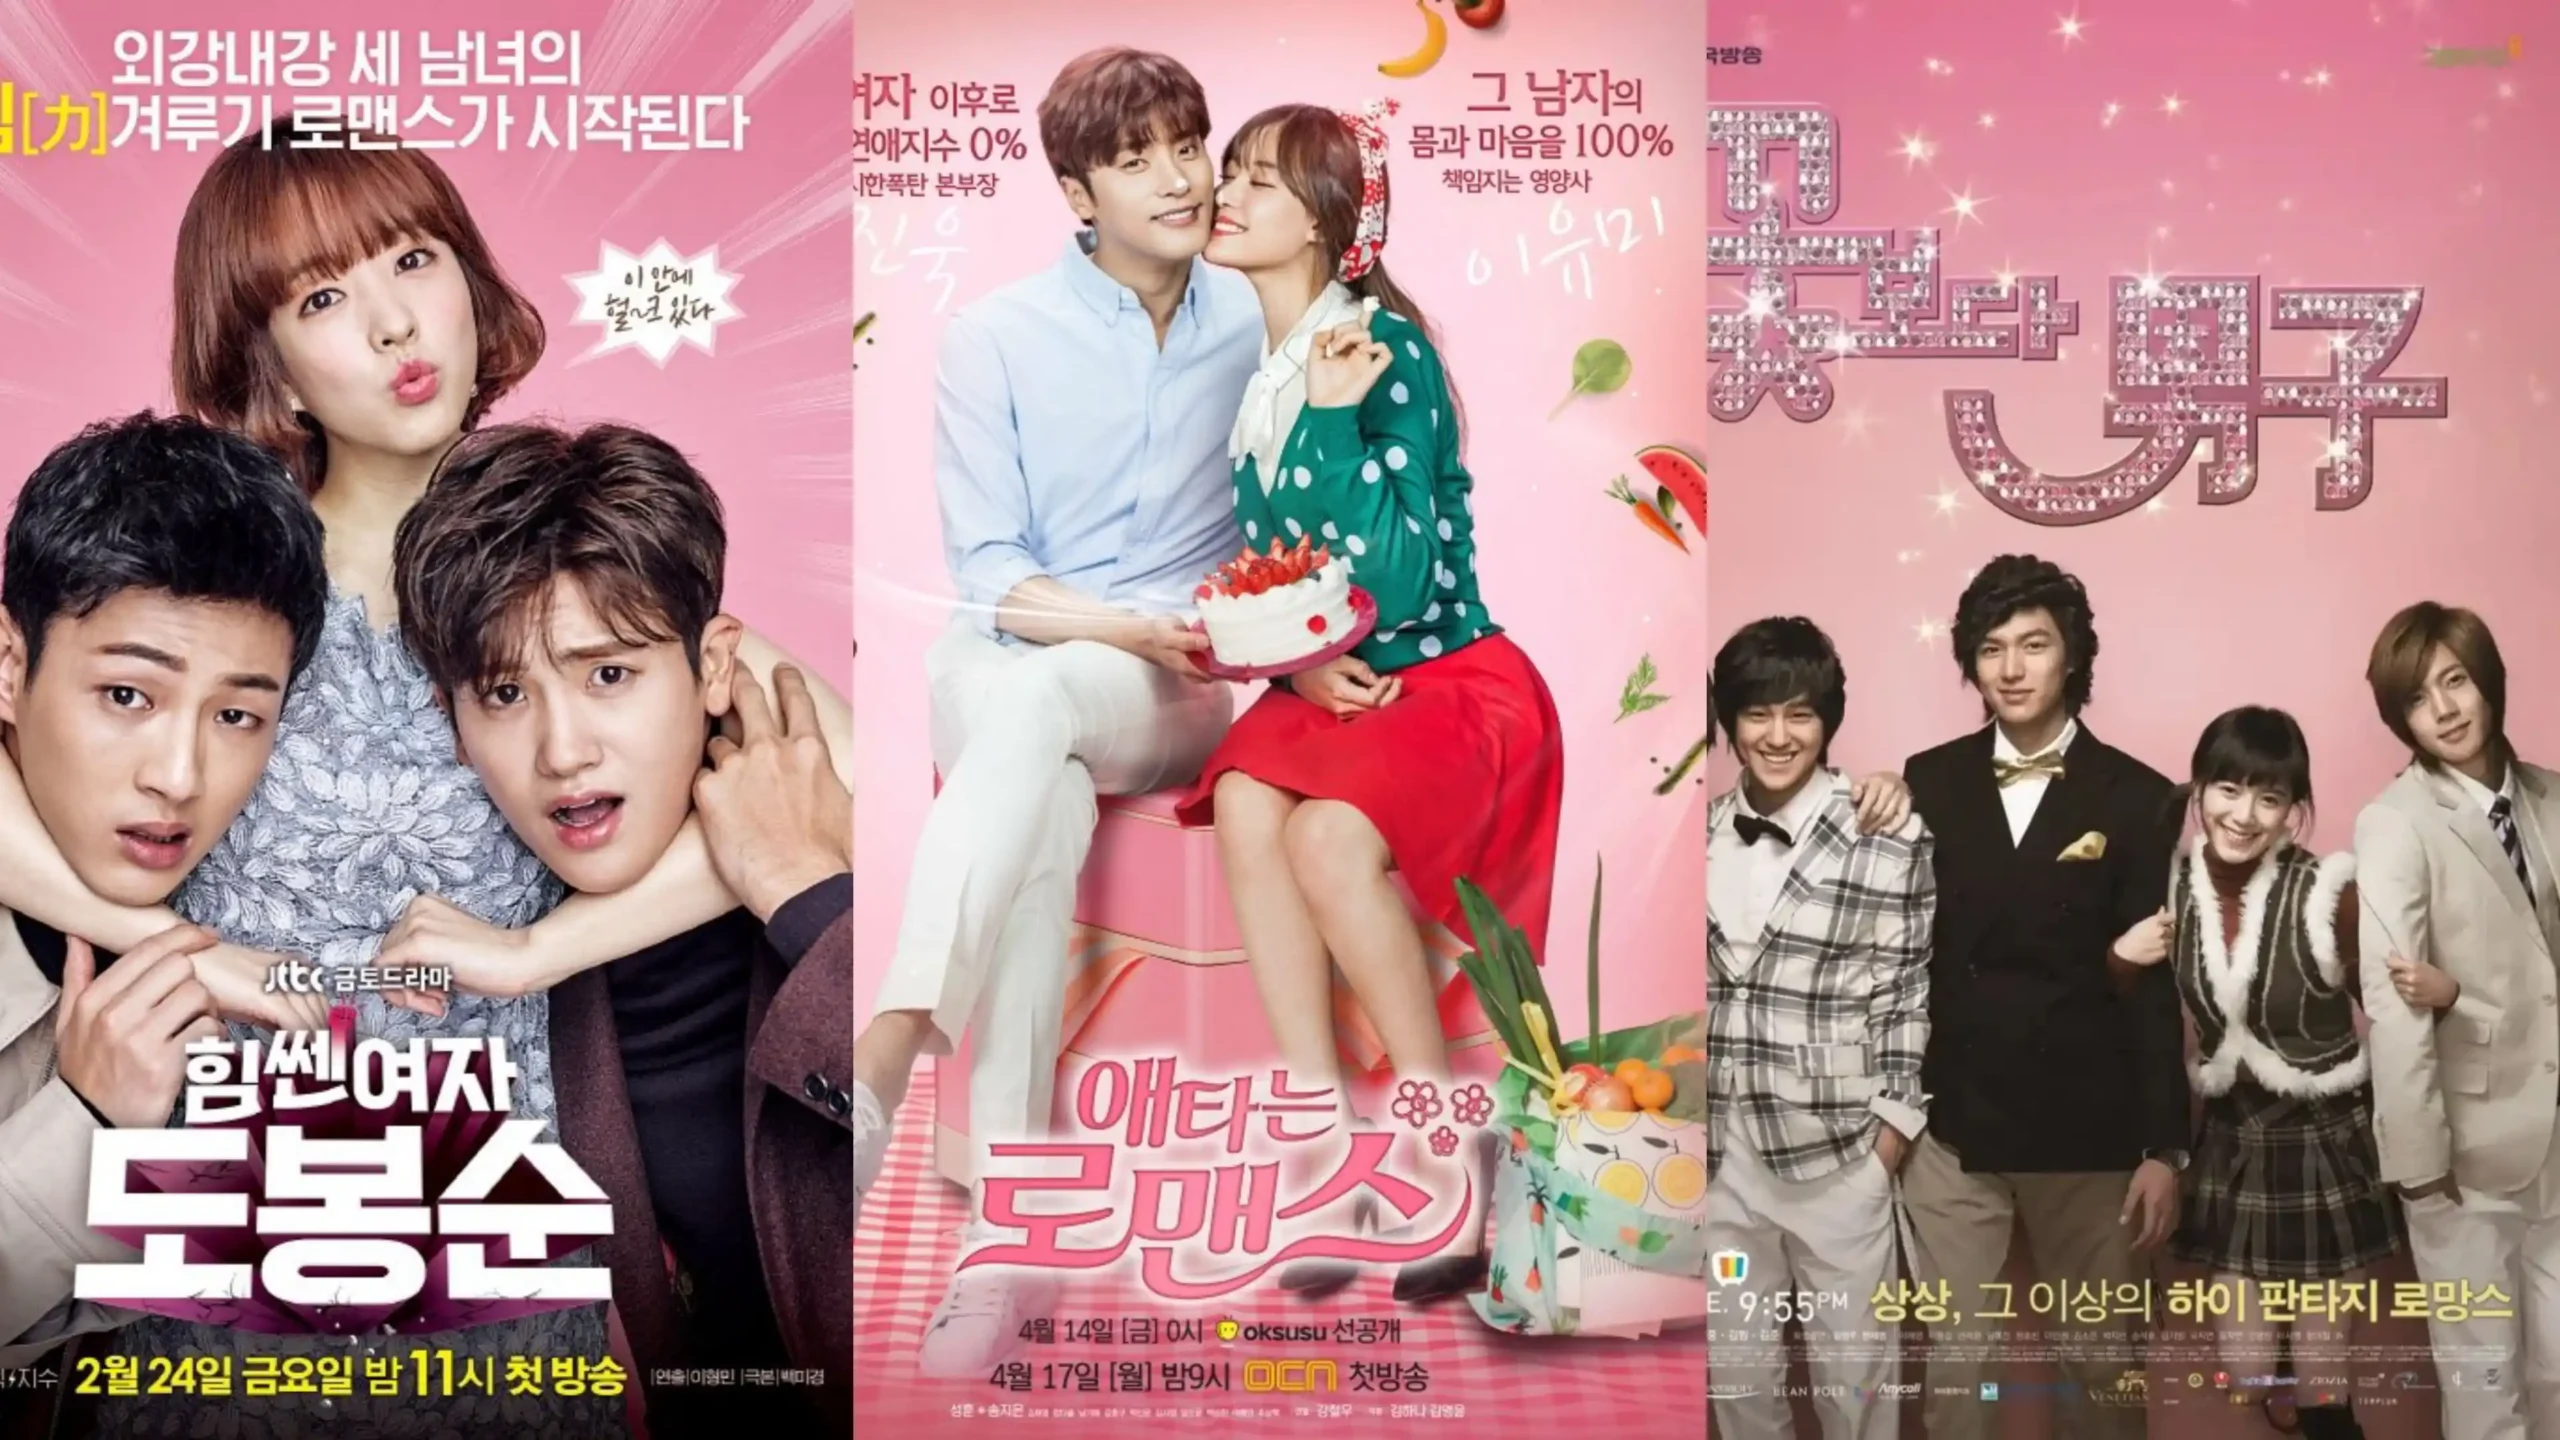 Best rich man and poor woman Korean dramas scaled